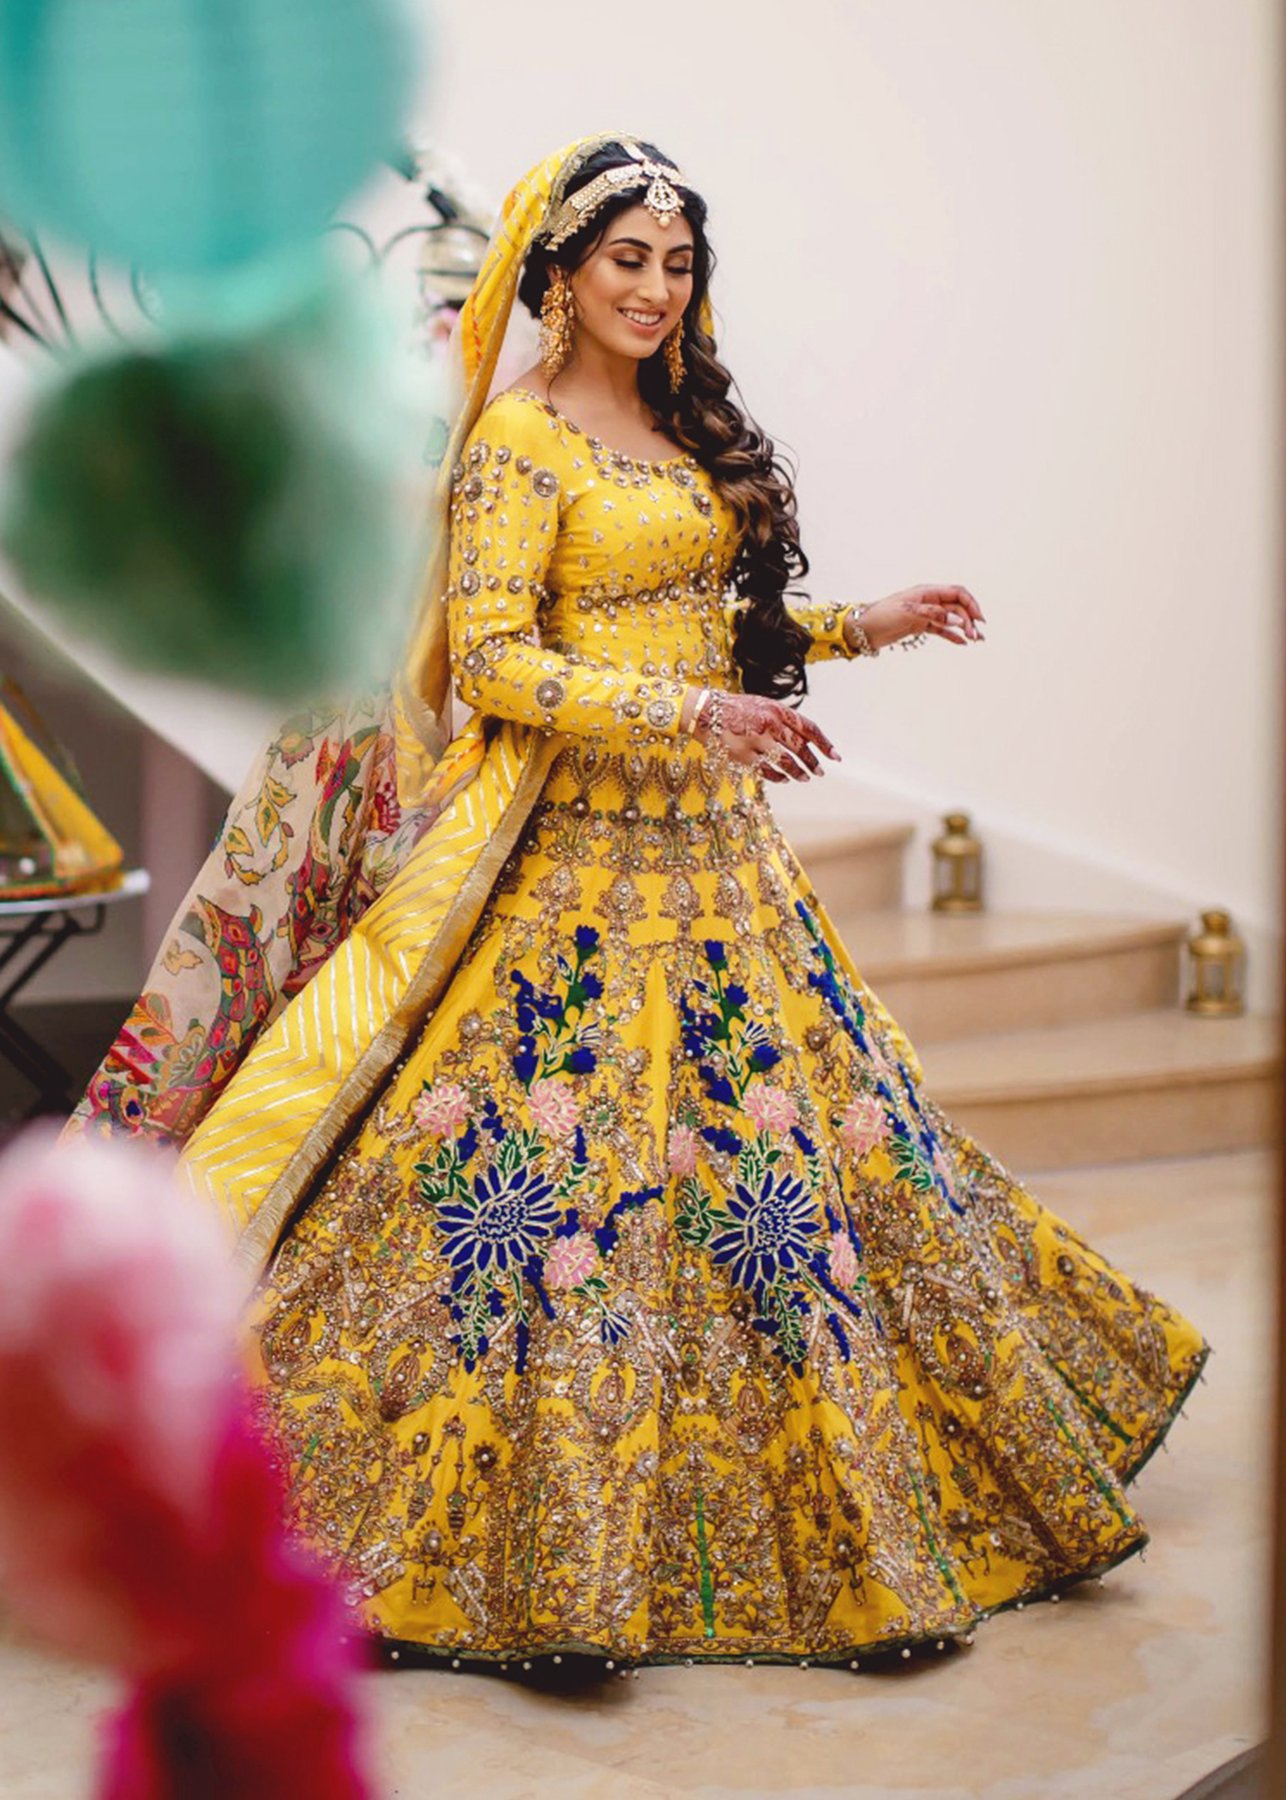 Discover more than 77 mayun and mehndi dresses - seven.edu.vn